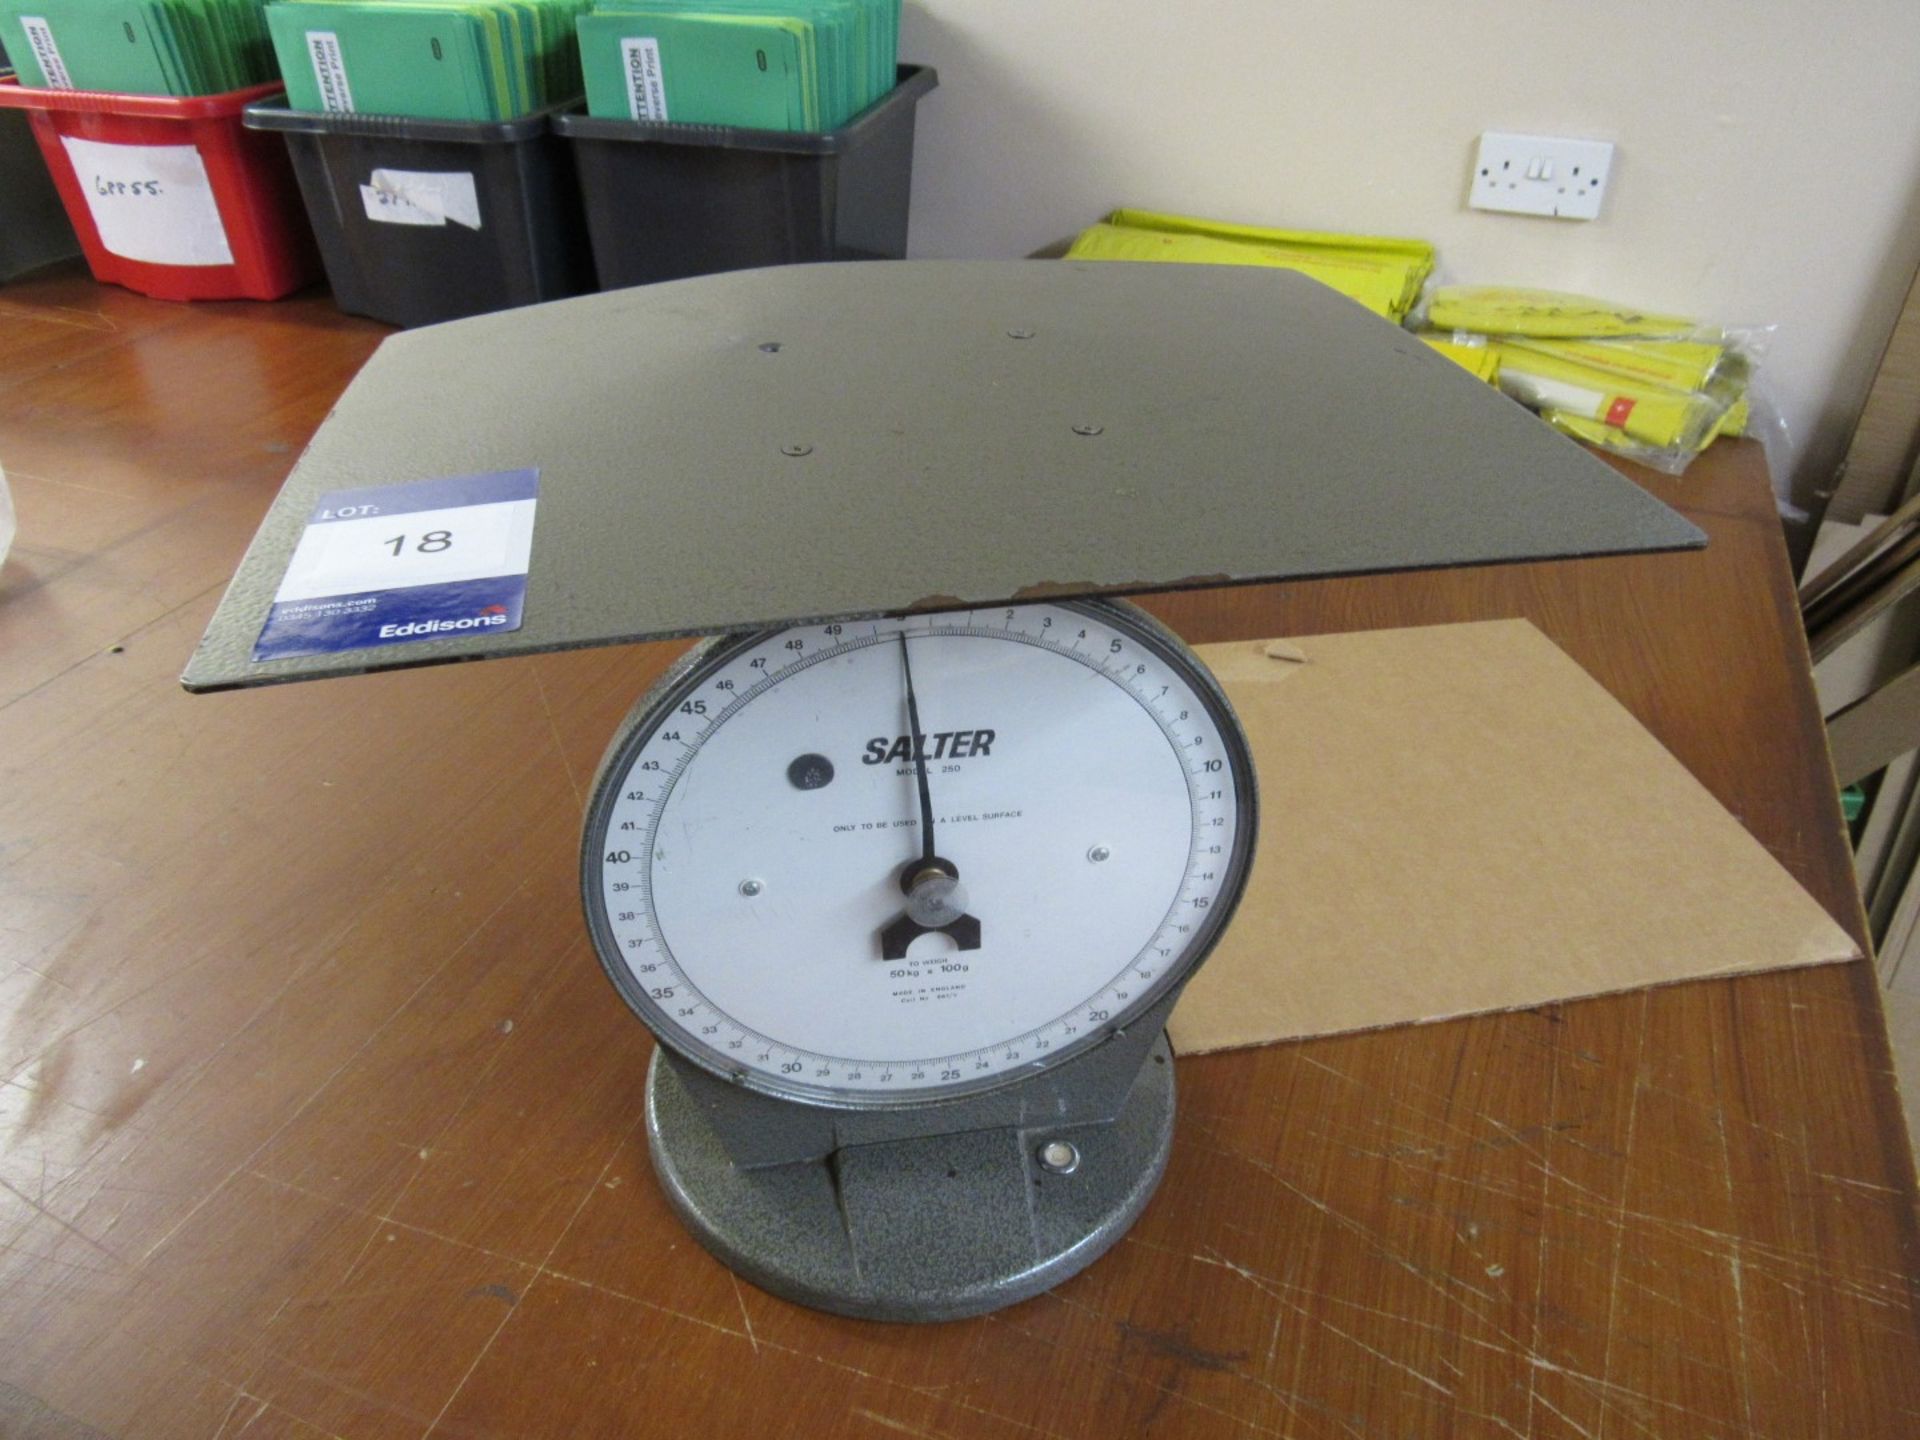 Slater 50KG x 100g Dial Scale - Image 2 of 2